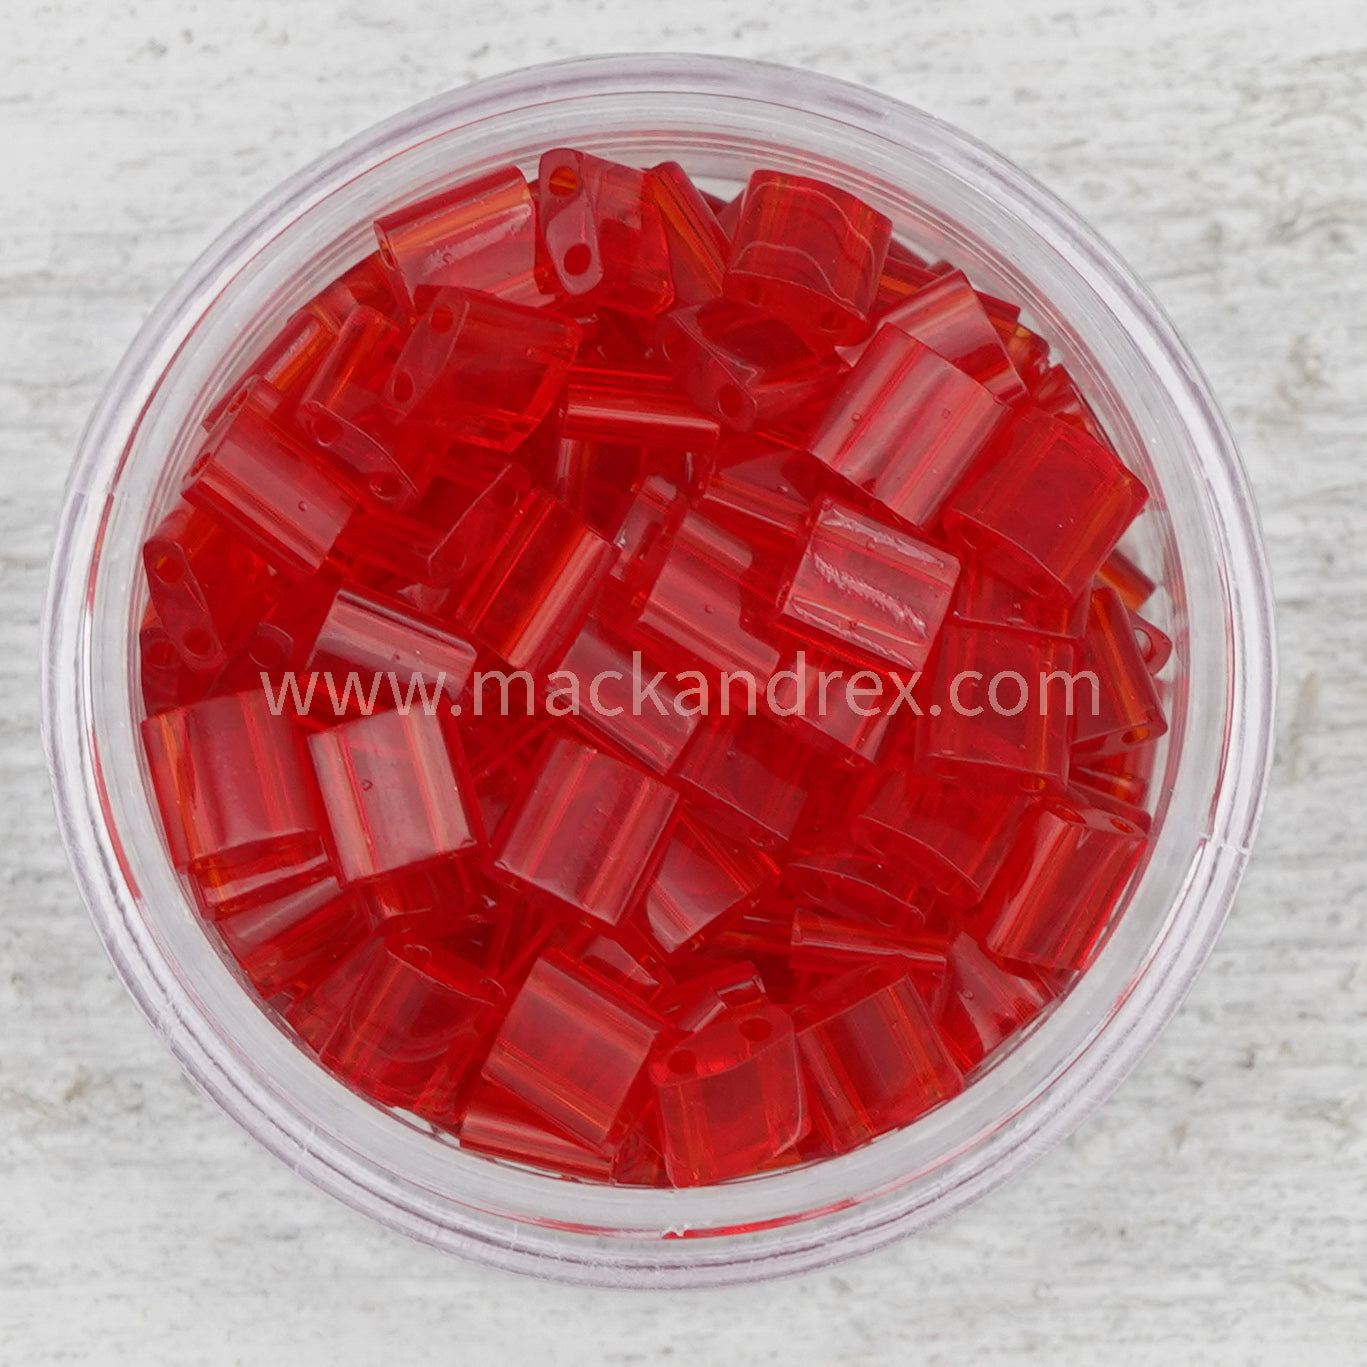 a bowl filled with red glass beads